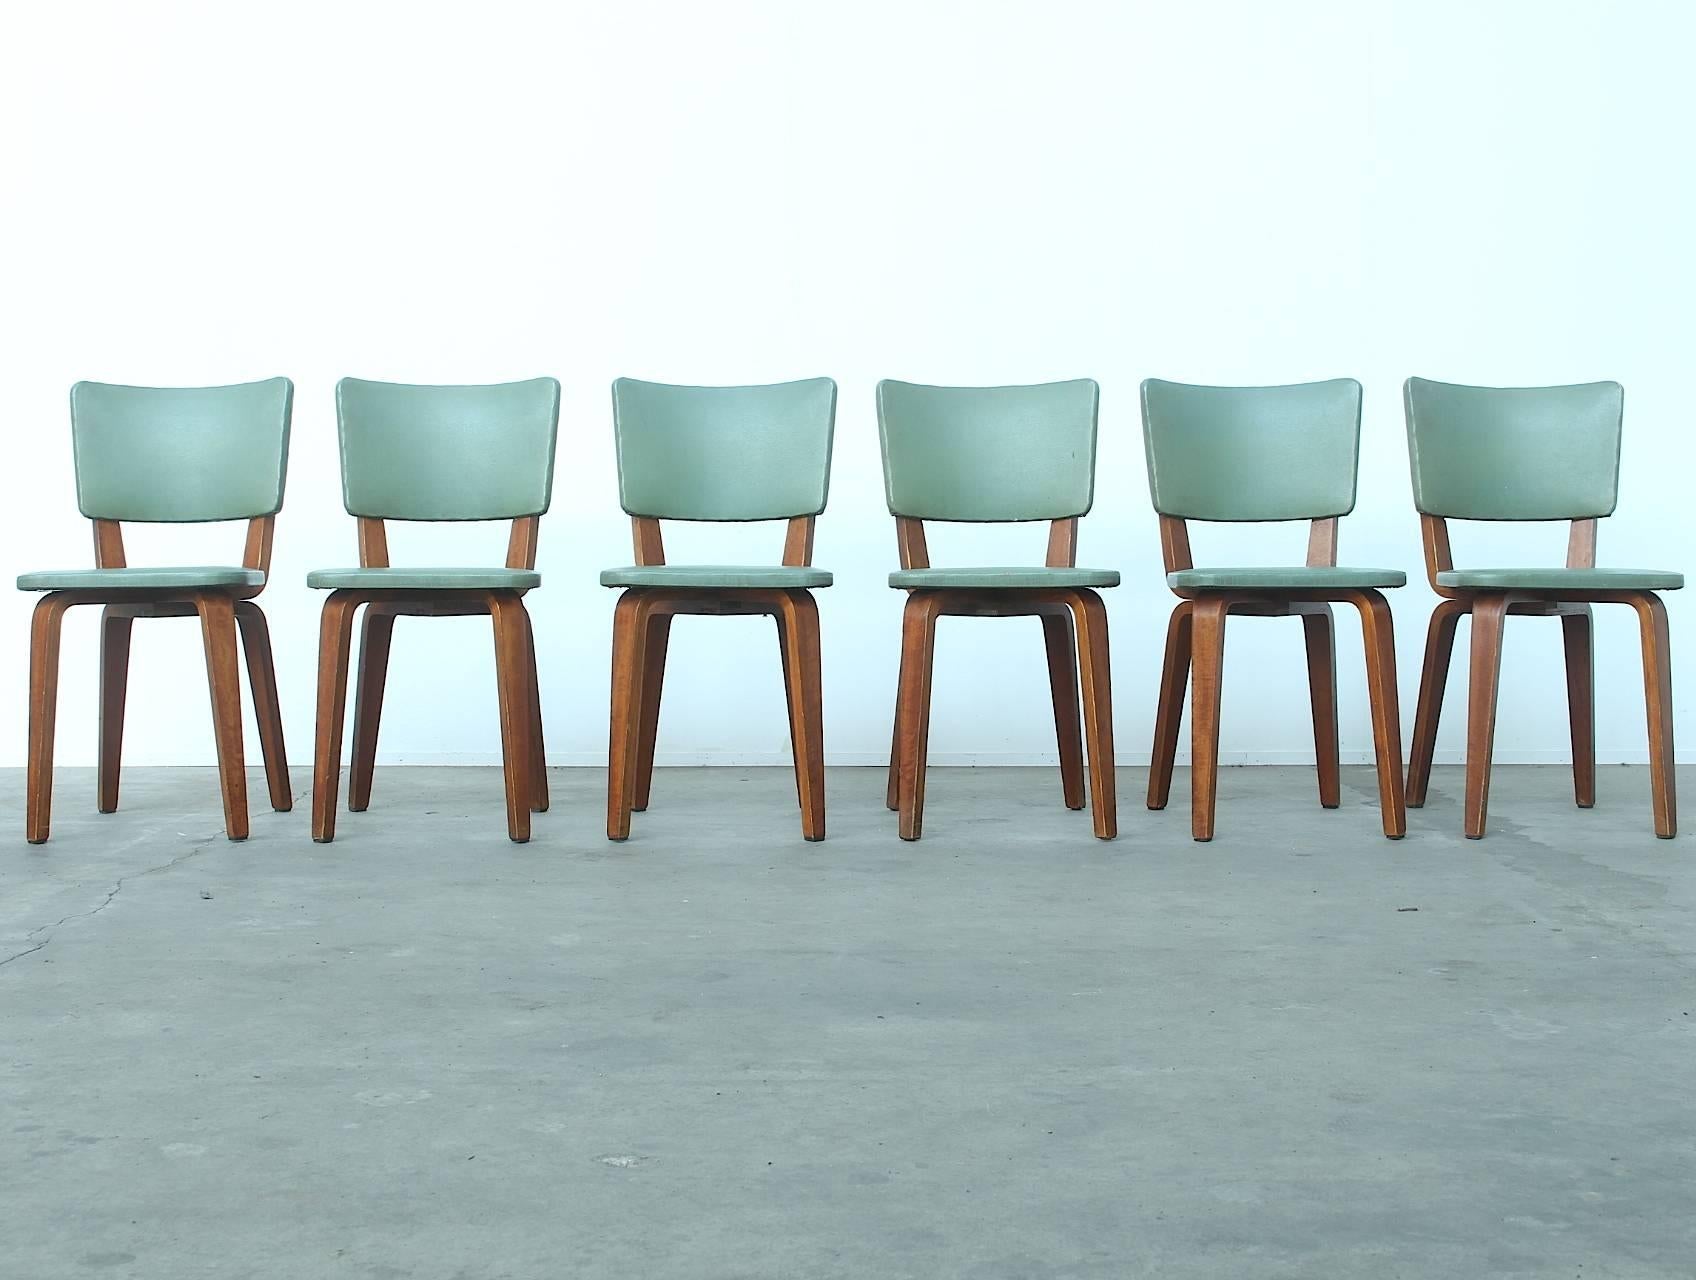 Beautiful early mid-century Dutch design dining chairs by Cor Alons manufactured by furniture factory Gouda Den Boer Holland, circa 1949.
The chairs are made of laminated birchwood and are upholstered in amazing color green leatherette, which is